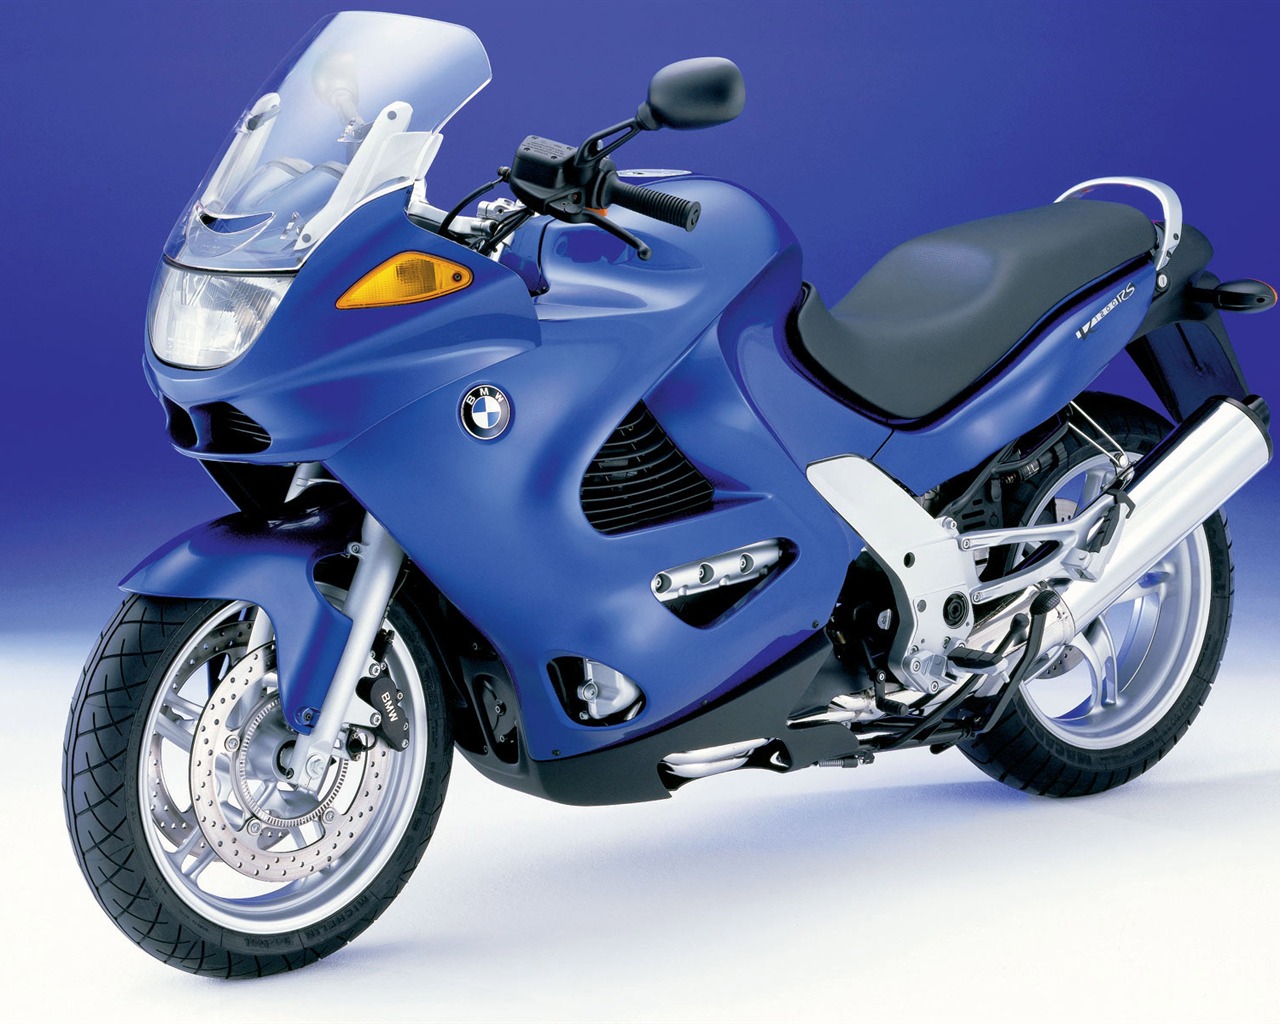 BMW motorcycle wallpapers (1) #2 - 1280x1024